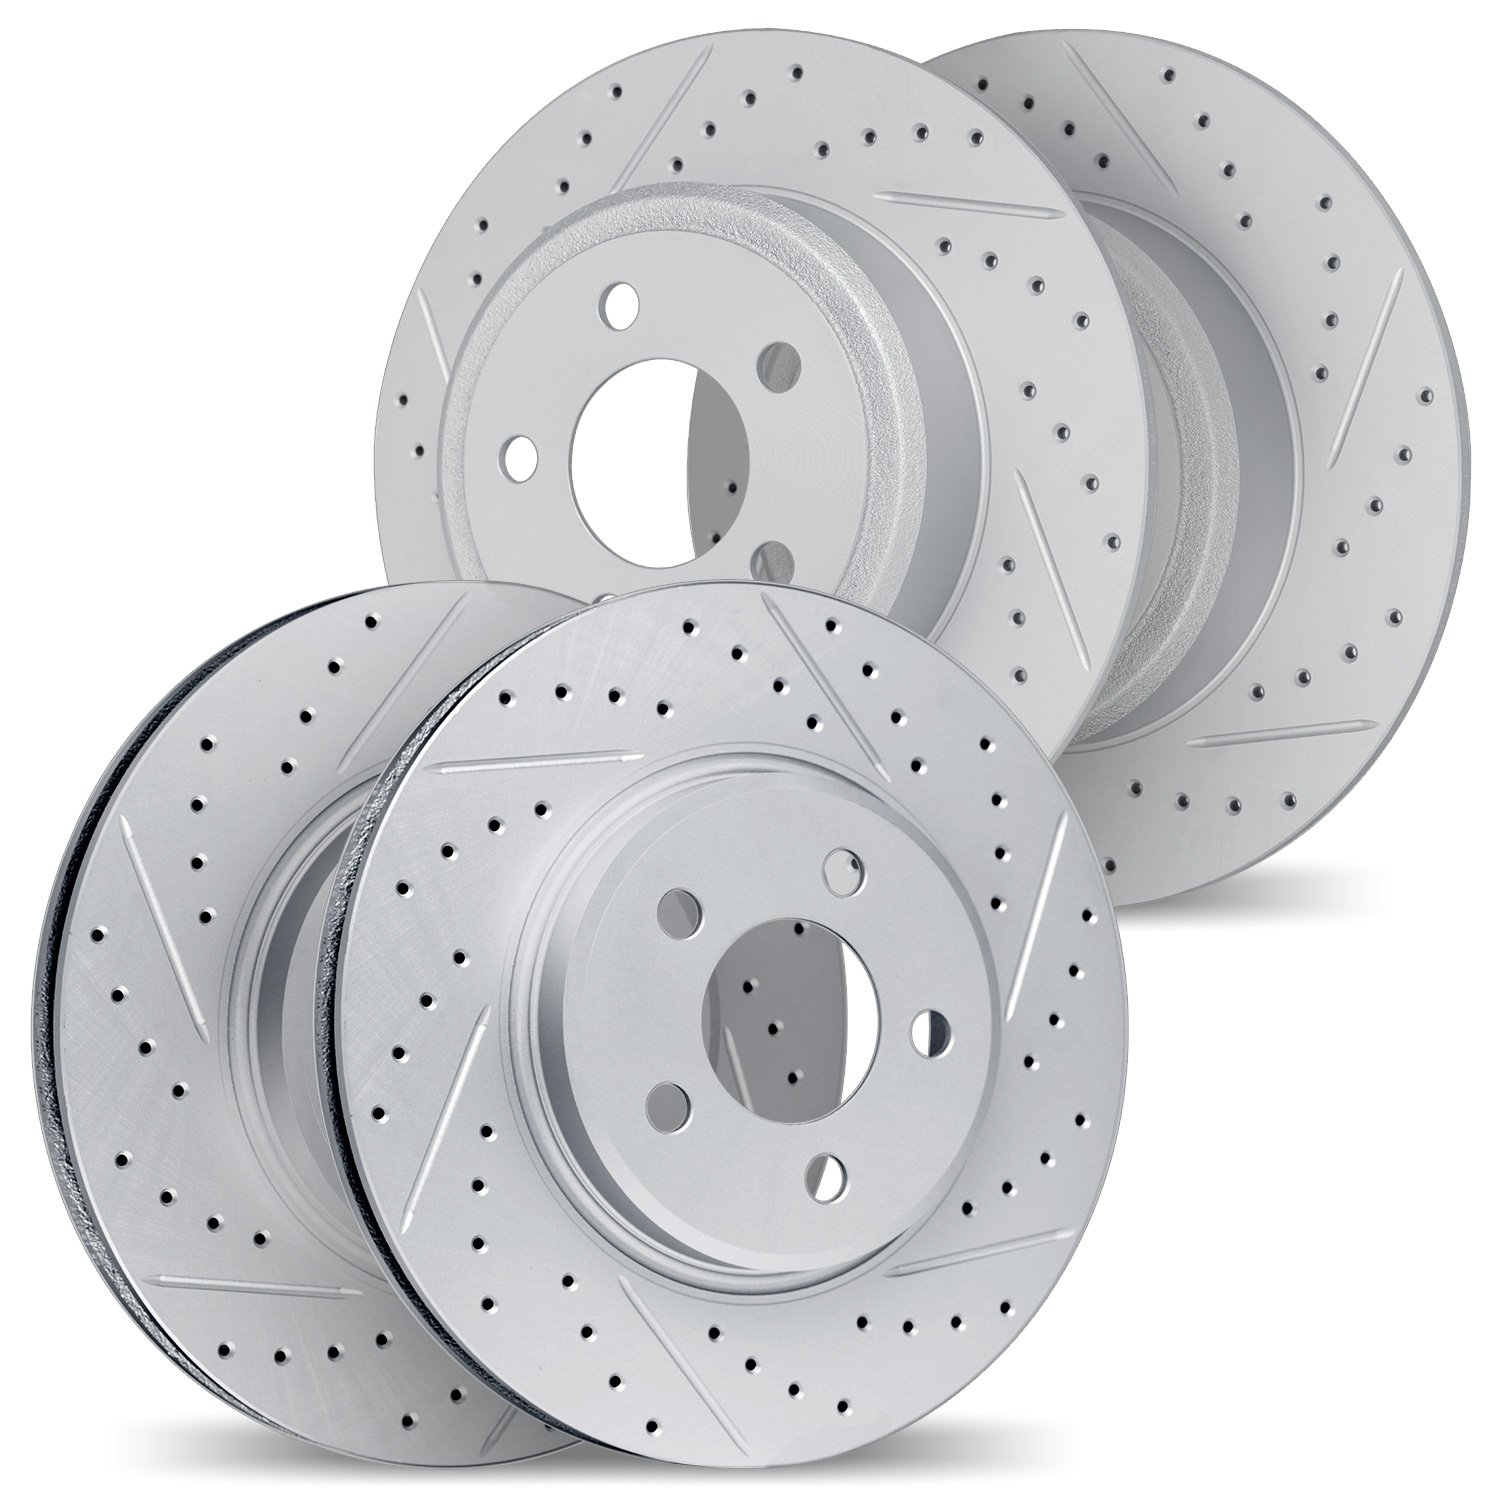 2004-45013 Geoperformance Drilled/Slotted Brake Rotors, 2006-2011 GM, Position: Front and Rear